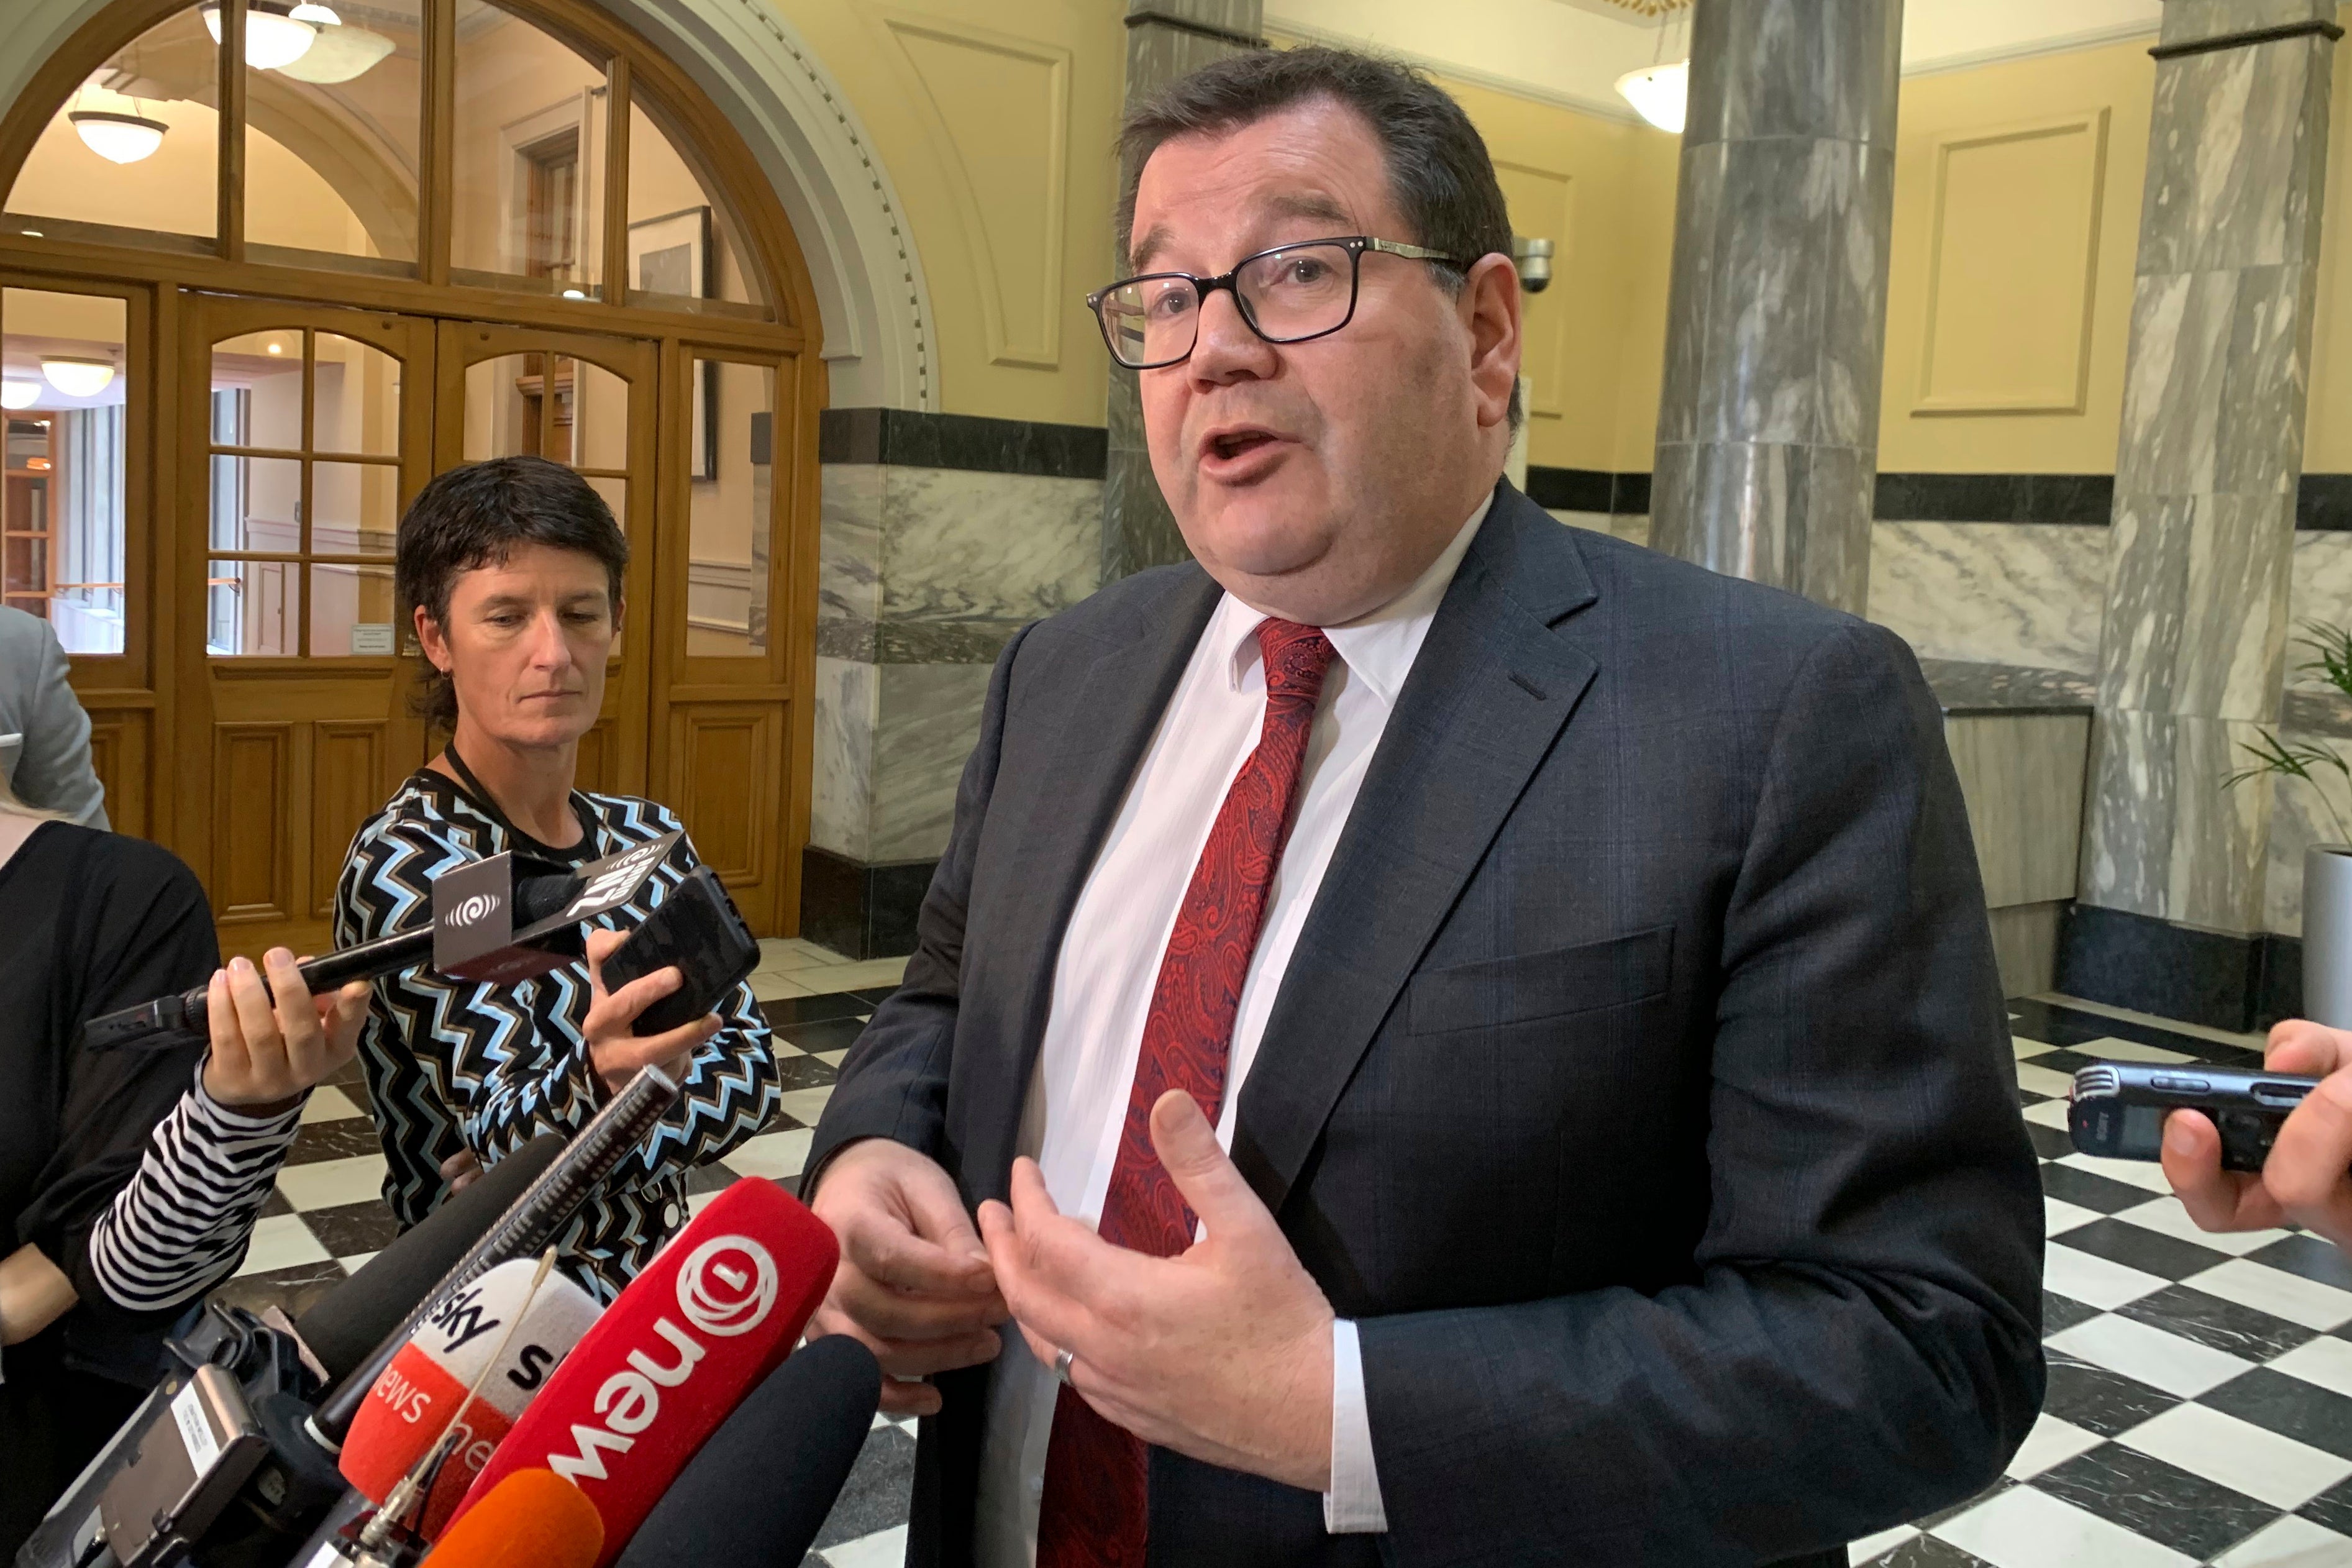 New Zealand’s new deputy prime minister Grant Robertson interacts with the media